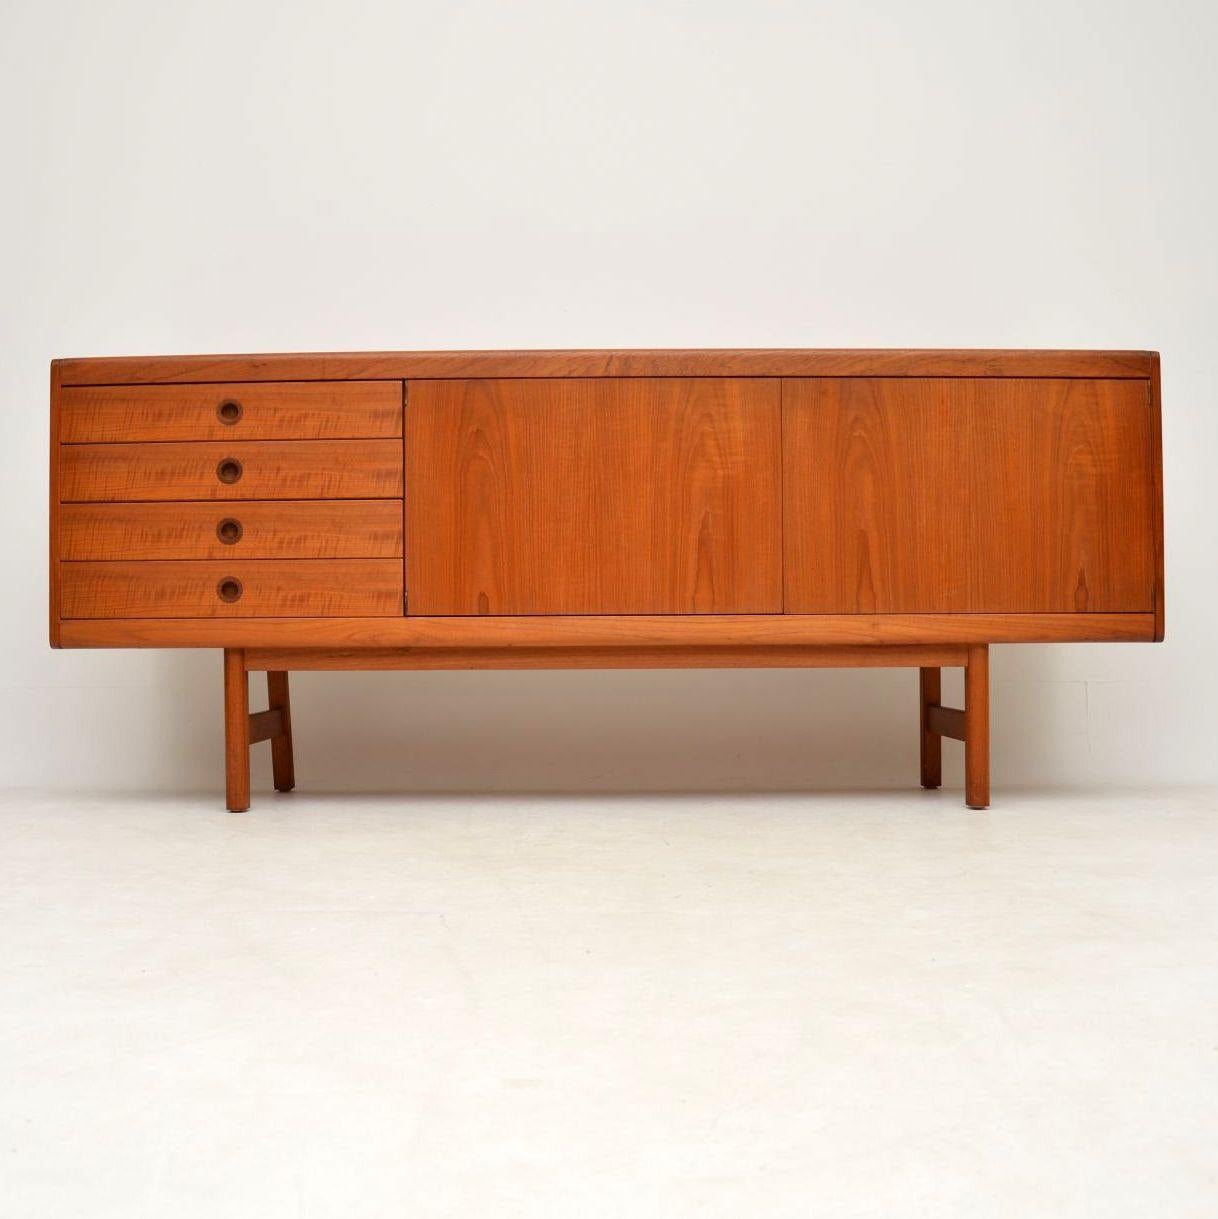 A stunning vintage teak sideboard designed by Robert Heritage, this was made by Archie Shine in the 1960s. It’s of superb quality, and this is very practical size, low and long, but not too long. The condition is excellent for its age, with only